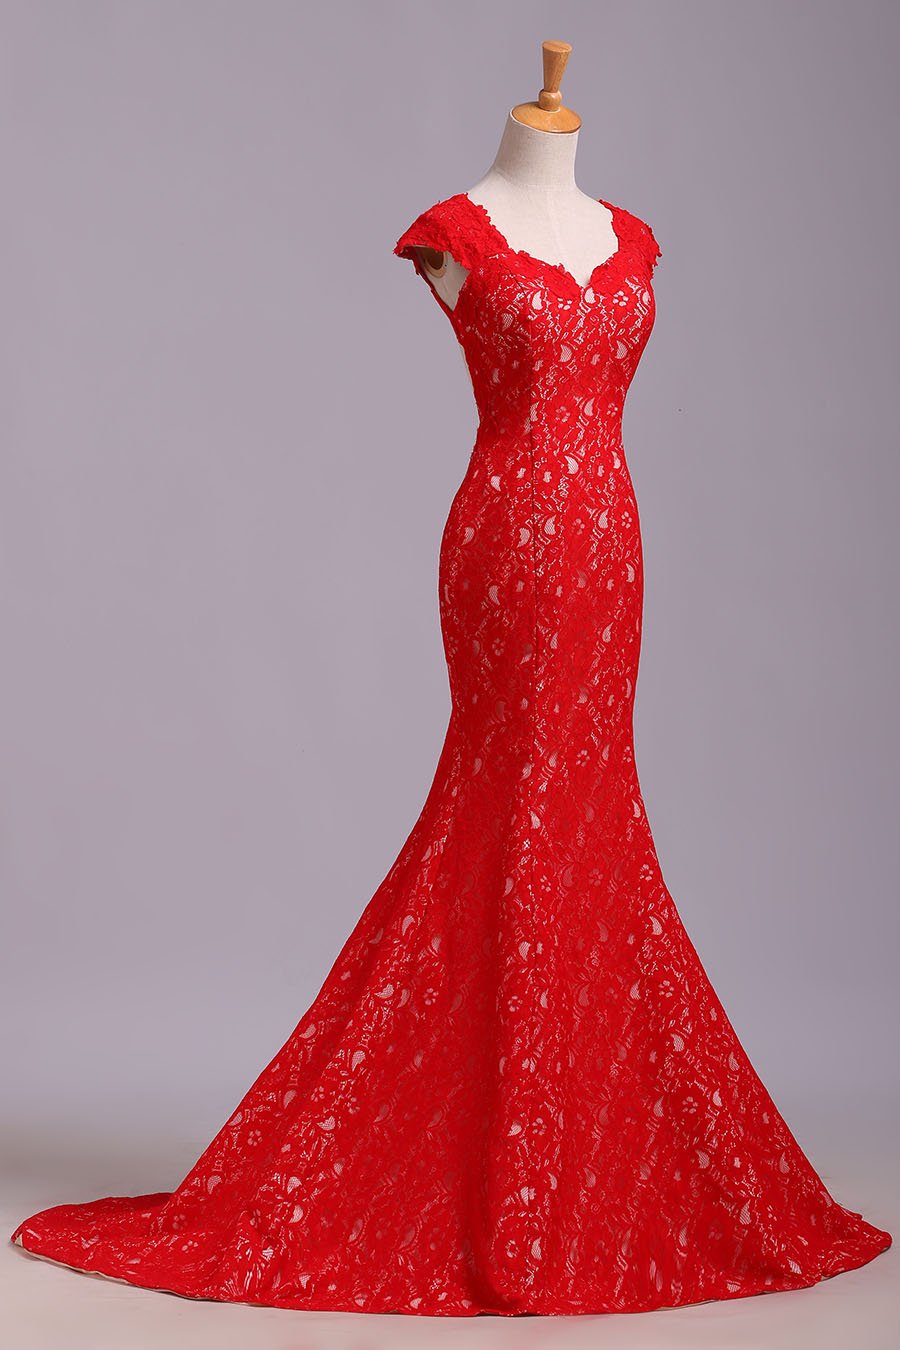 Elegant Red Sweetheart Mermaid Lace Cap Sleeve Open Back Prom Dress Party Dresses WK175